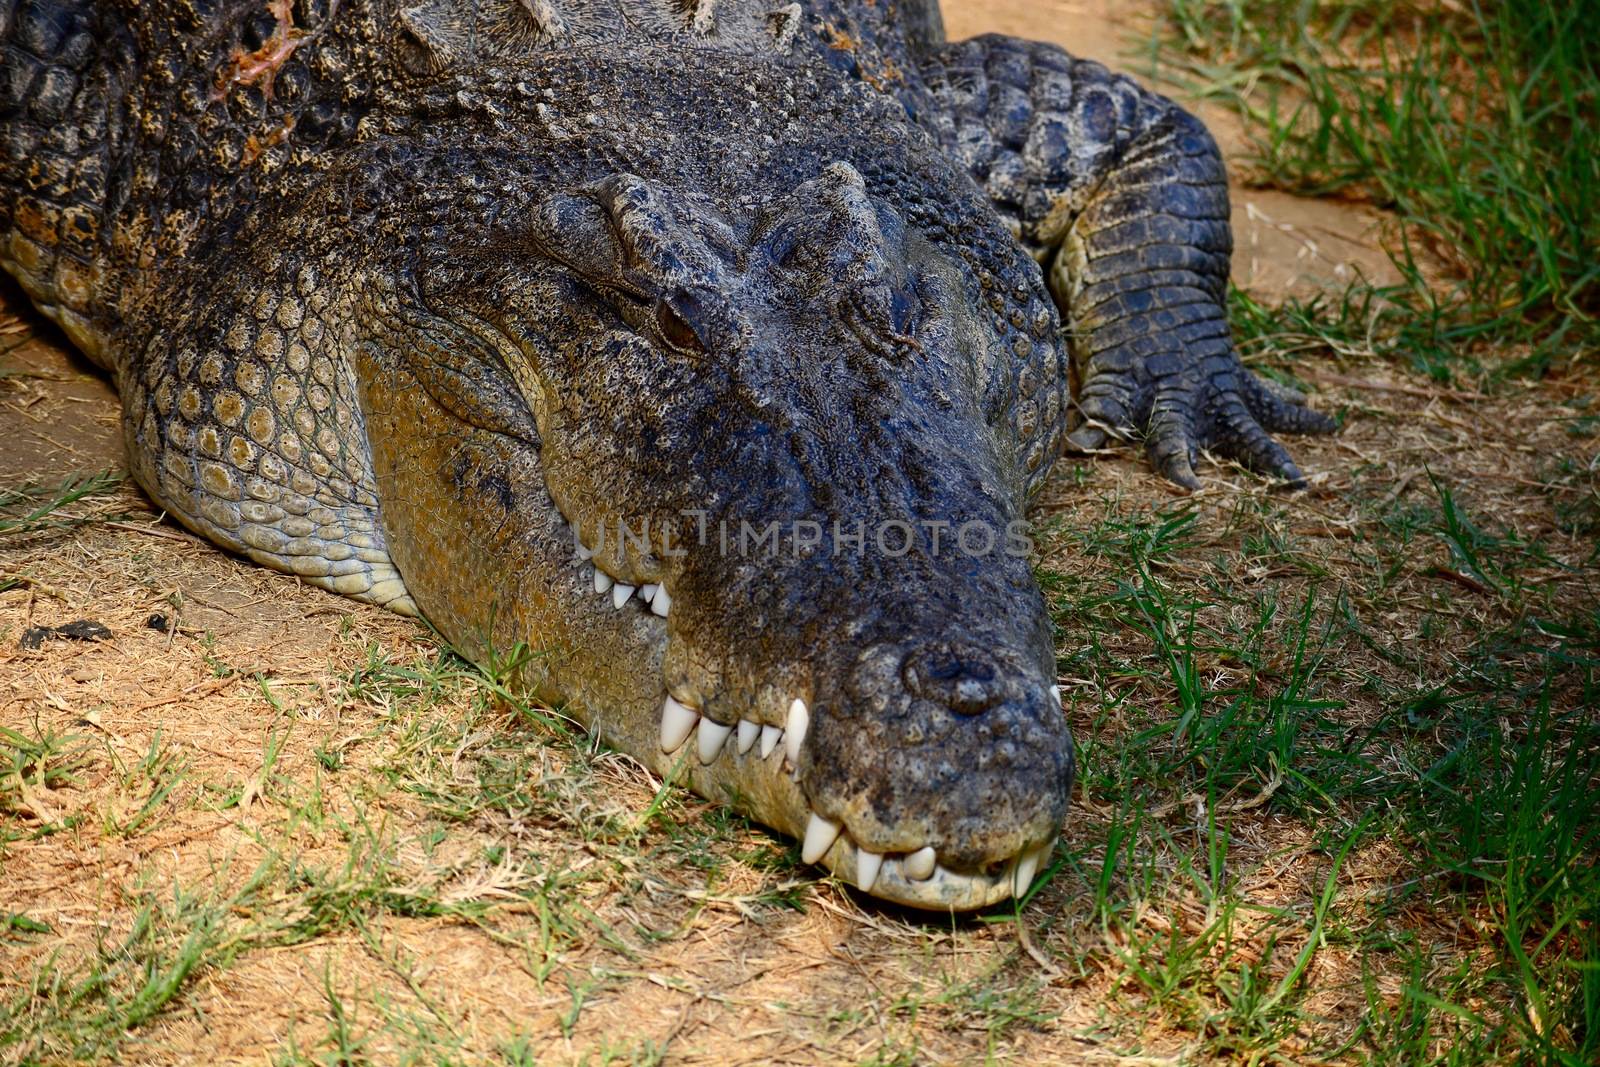 American alligator (Alligator mississippiensis), sometimes referred to colloquially as a gator or common alligator, is a large crocodilian reptile endemic to the Southeastern United States.  by Marshalkina